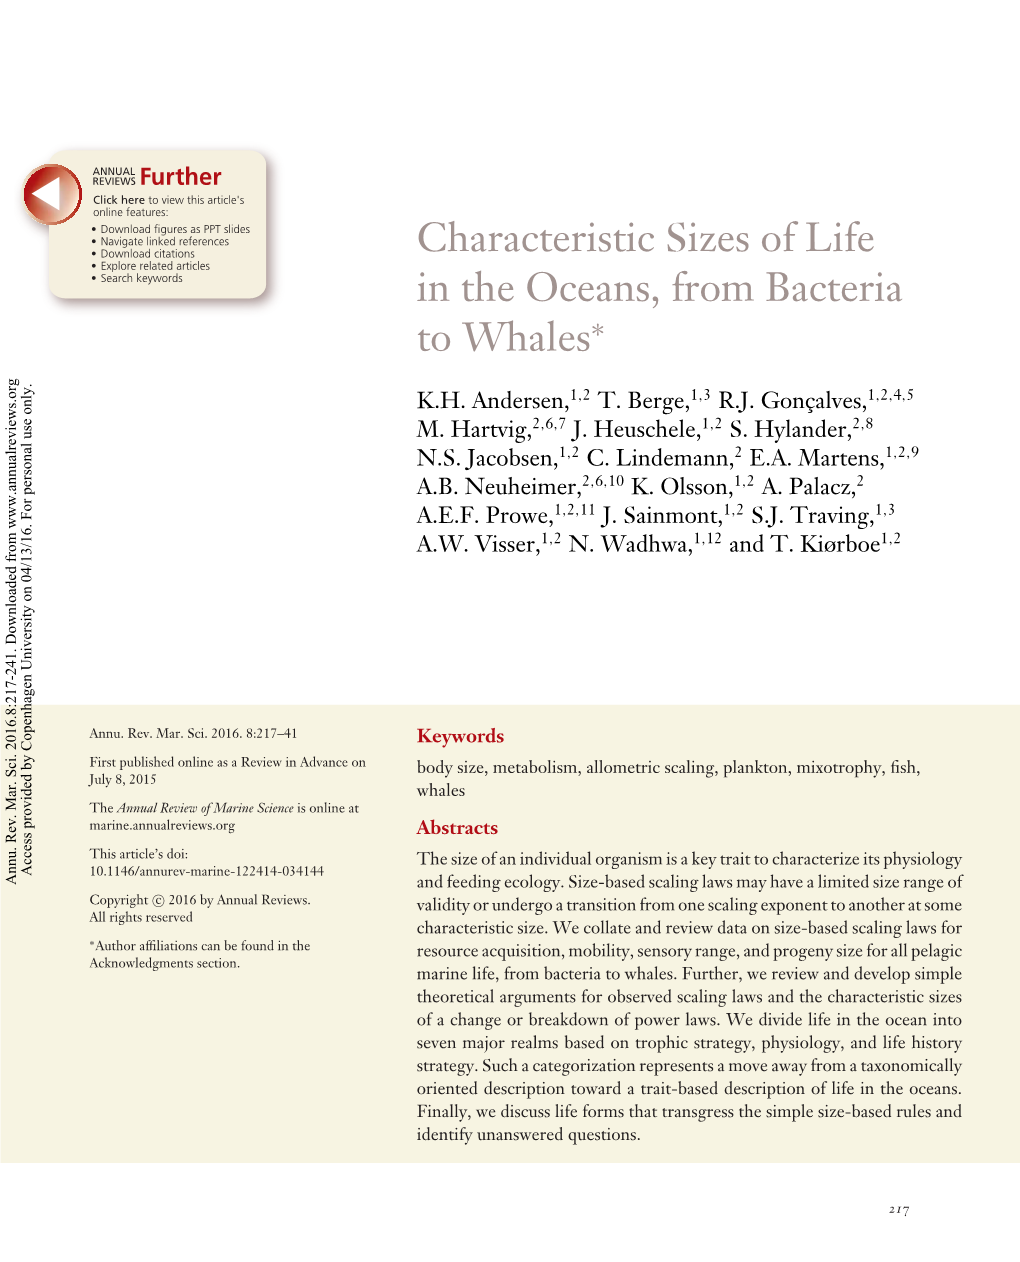 Characteristic Sizes of Life in the Oceans, from Bacteria to Whales K.H